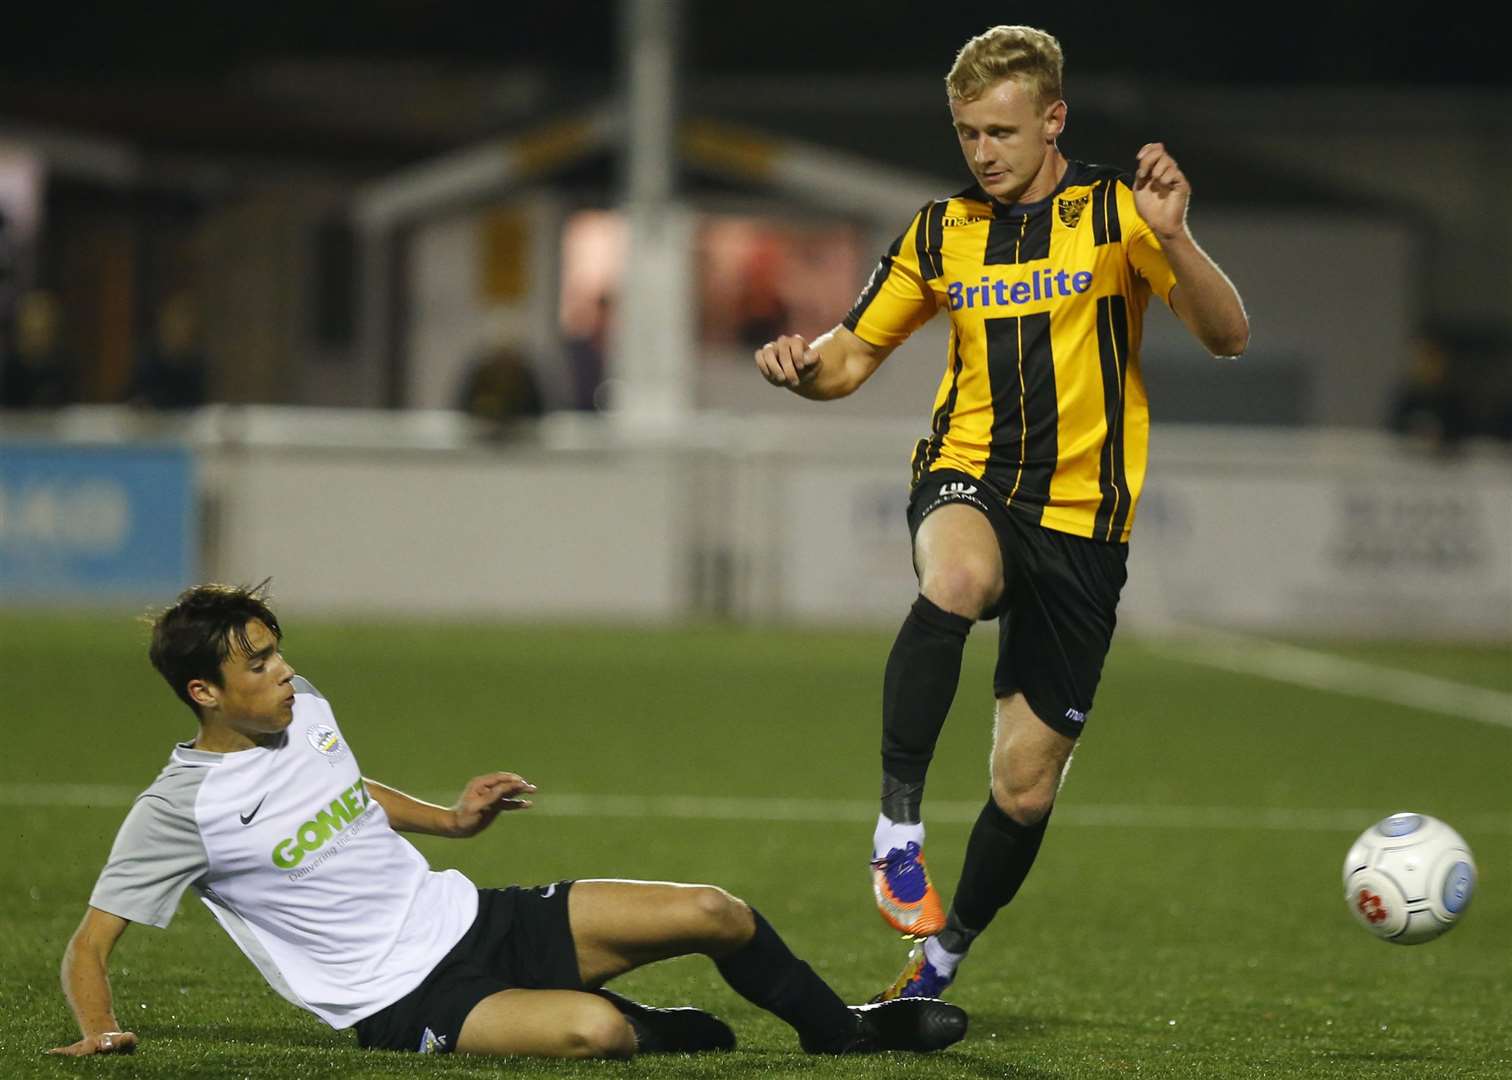 Maidstone's George McLennan takes on Dover's Lewis Cotter Picture: Andy Jones